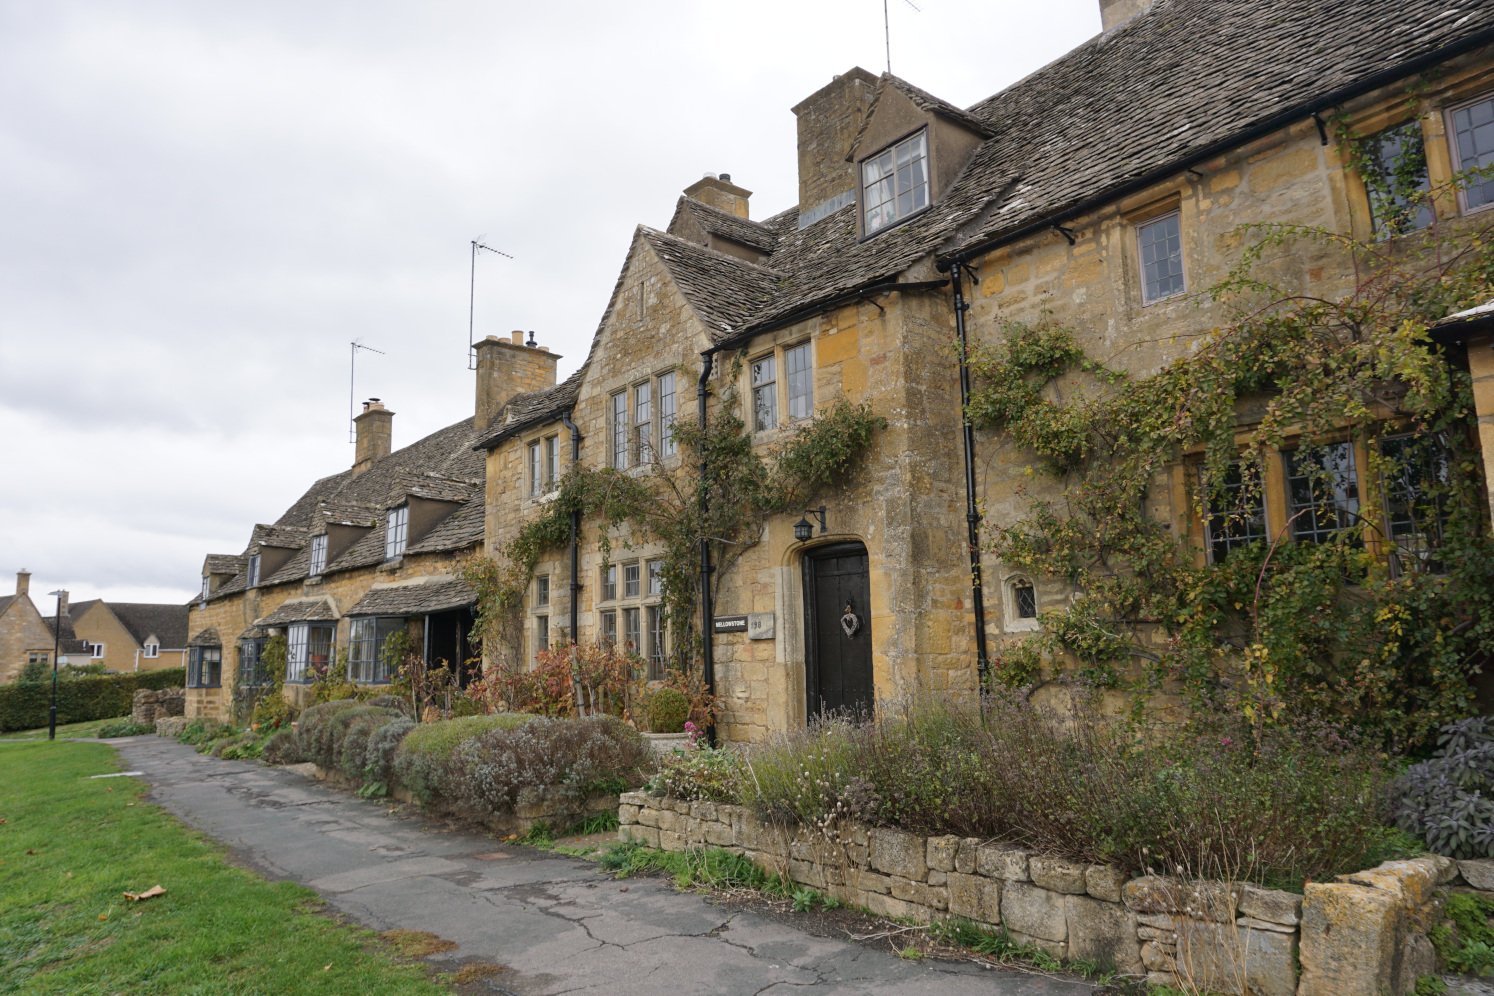 Discovering quaint cottages in Broadway when following travel itineraries for exploring the Cotswolds without a car